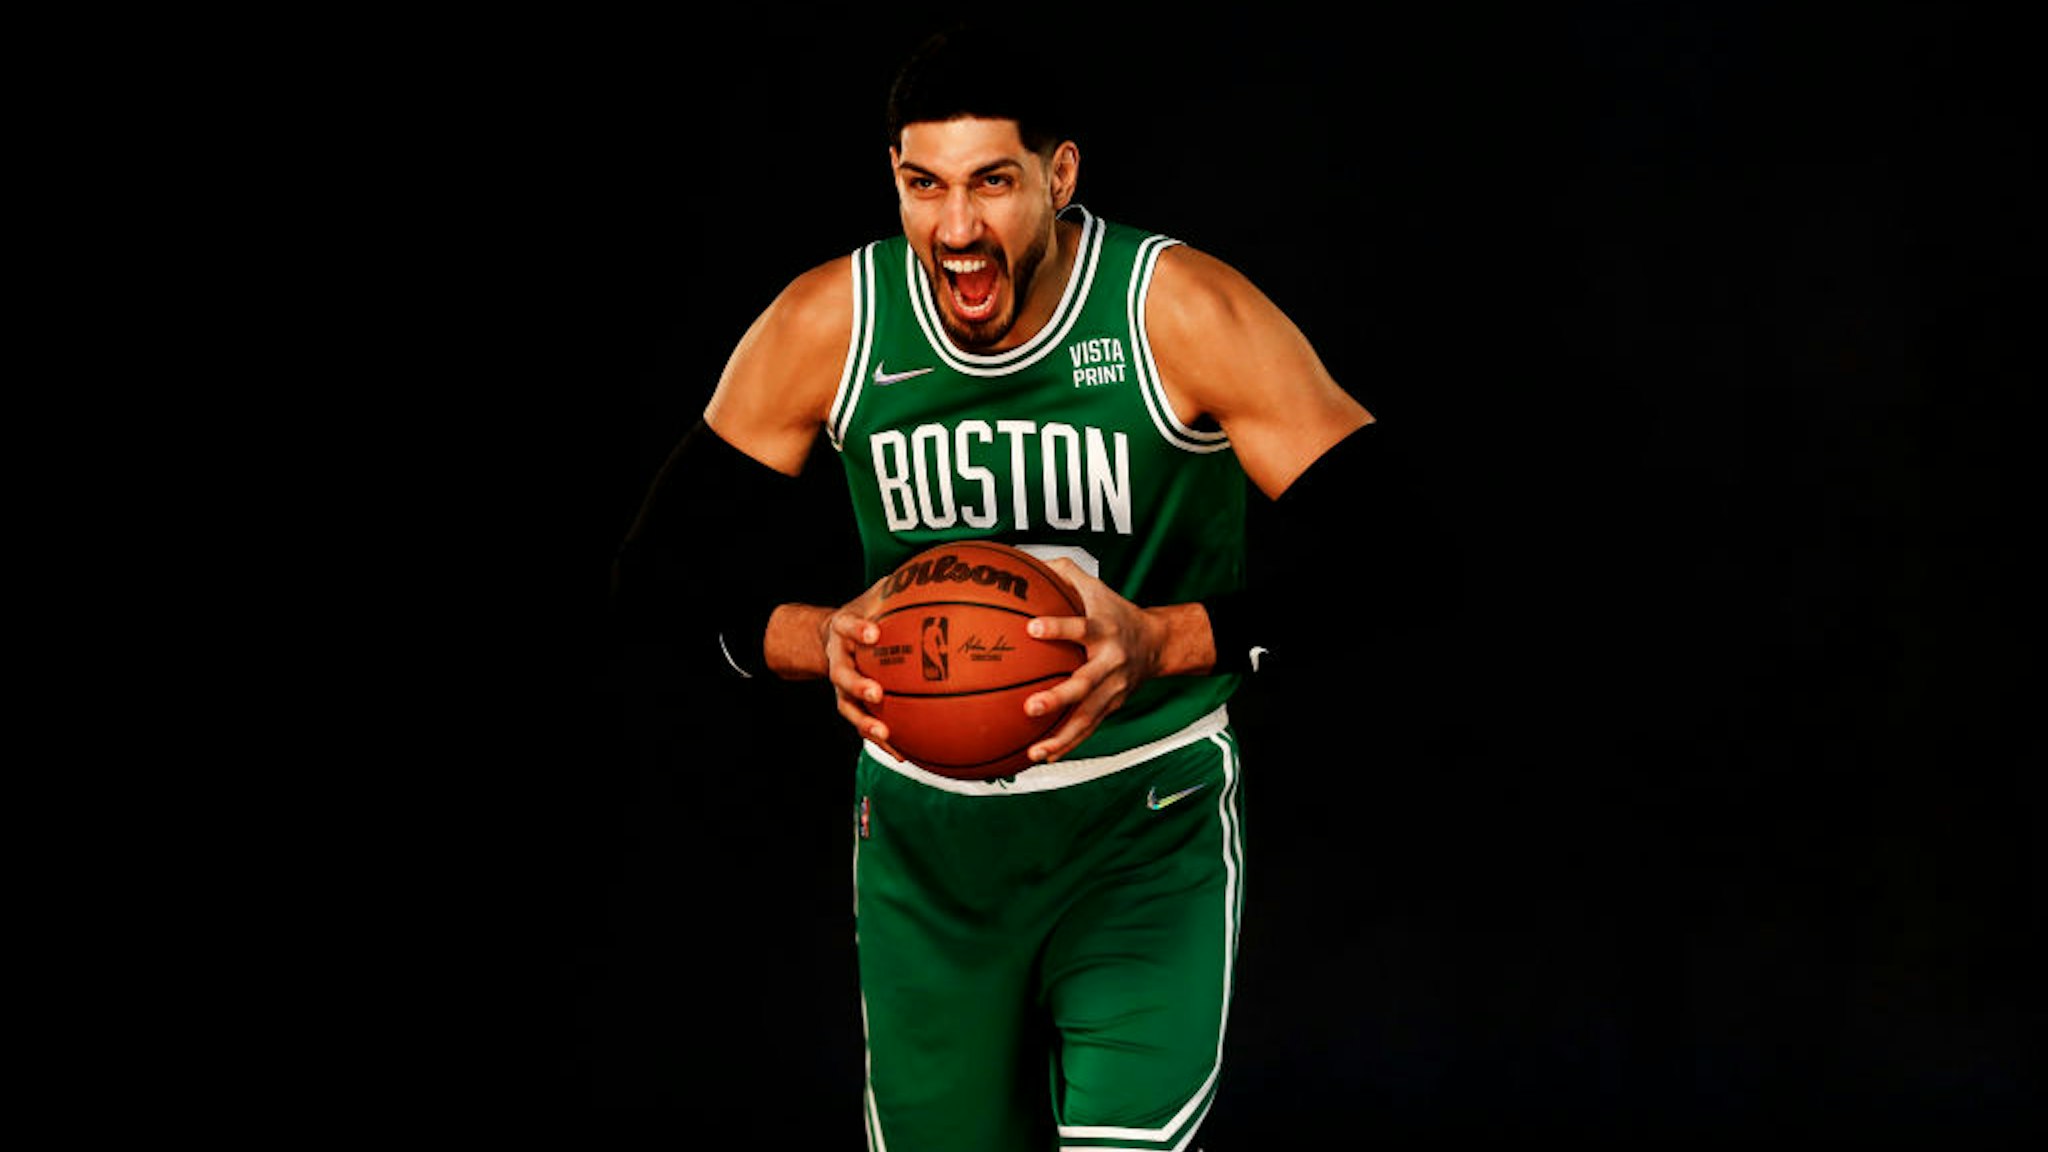 CANTON, MASSACHUSETTS - SEPTEMBER 27: Enes Kanter #13 of the Boston Celtics poses for a photo during Media Day at High Output Studios on September 27, 2021 in Canton, Massachusetts. NOTE TO USER: User expressly acknowledges and agrees that, by downloading and or using this photograph, User is consenting to the terms and conditions of the Getty Images License Agreement. (Photo by Omar Rawlings/Getty Images)